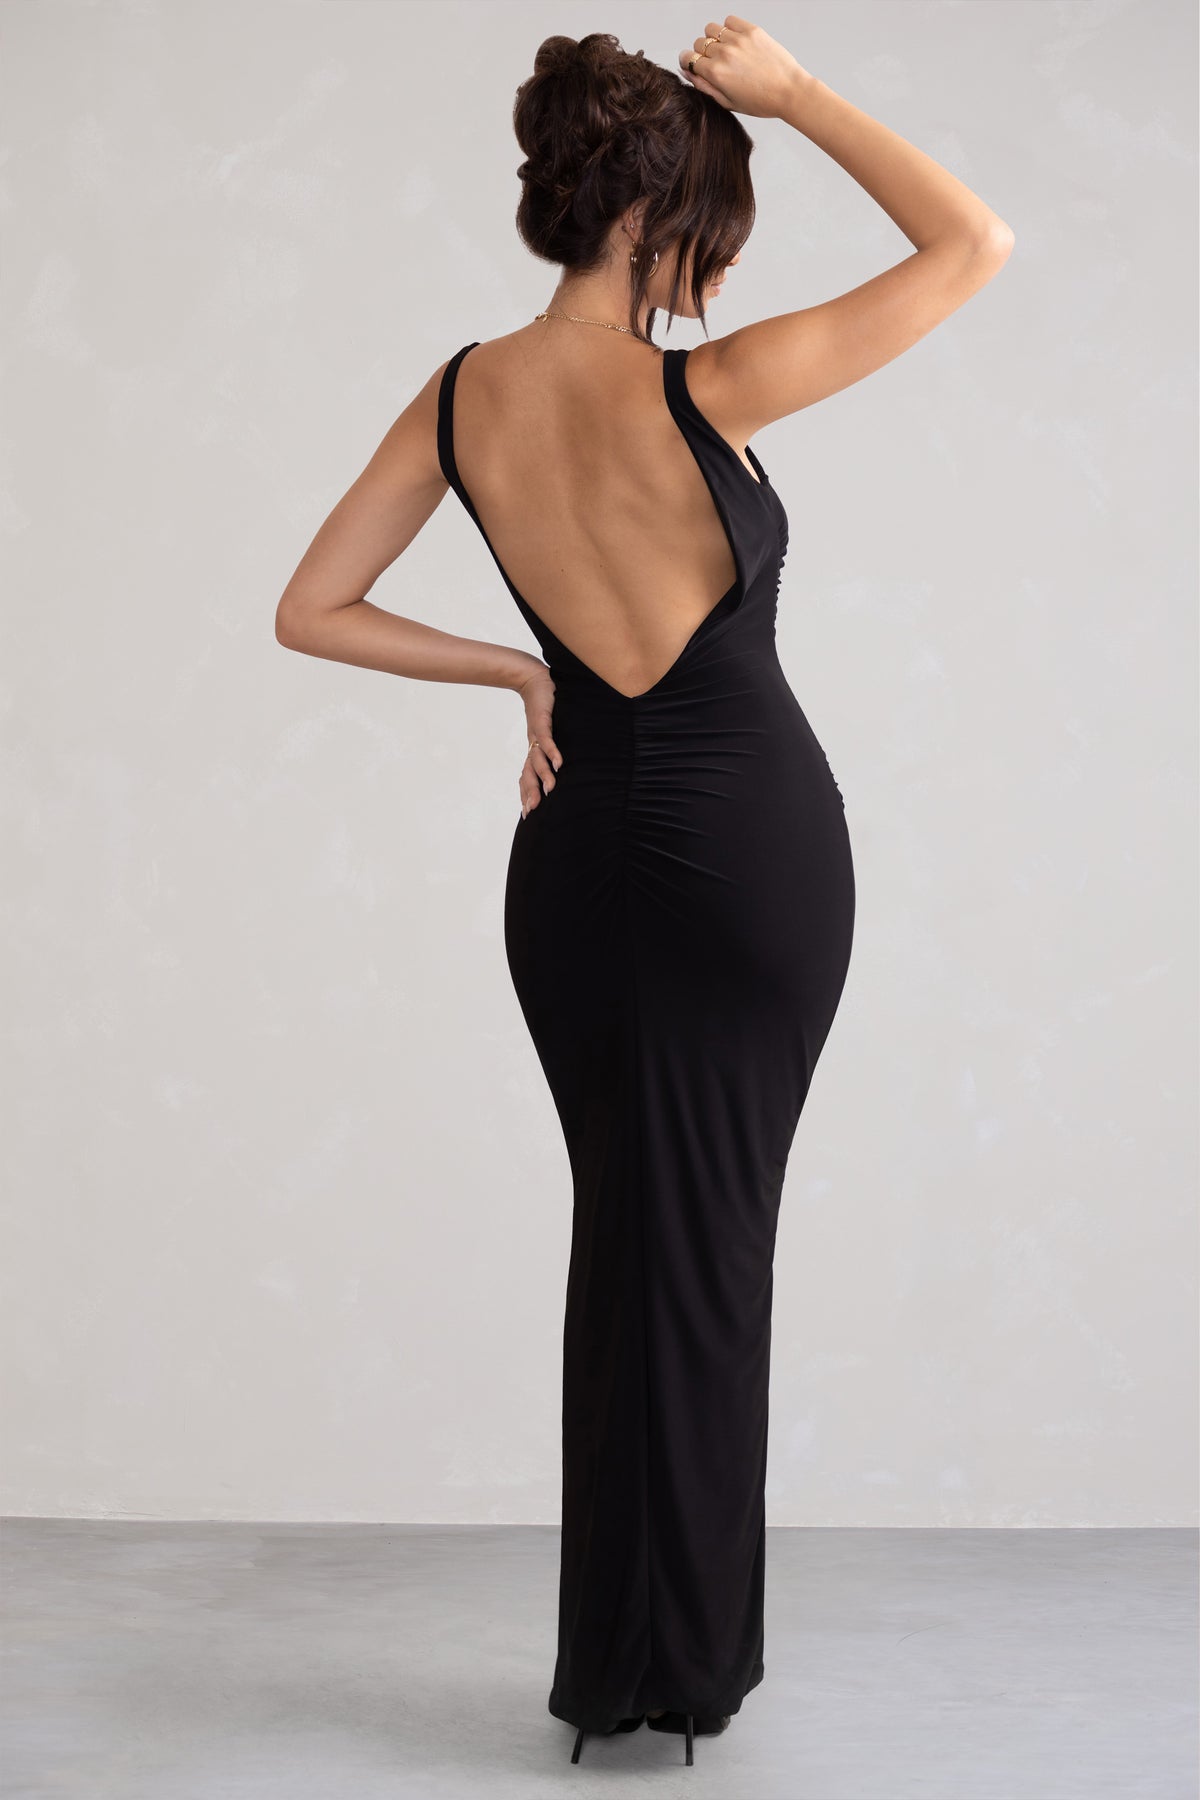 Kate Black Square Neck Maxi Dress with Plunge Back and Side Thigh